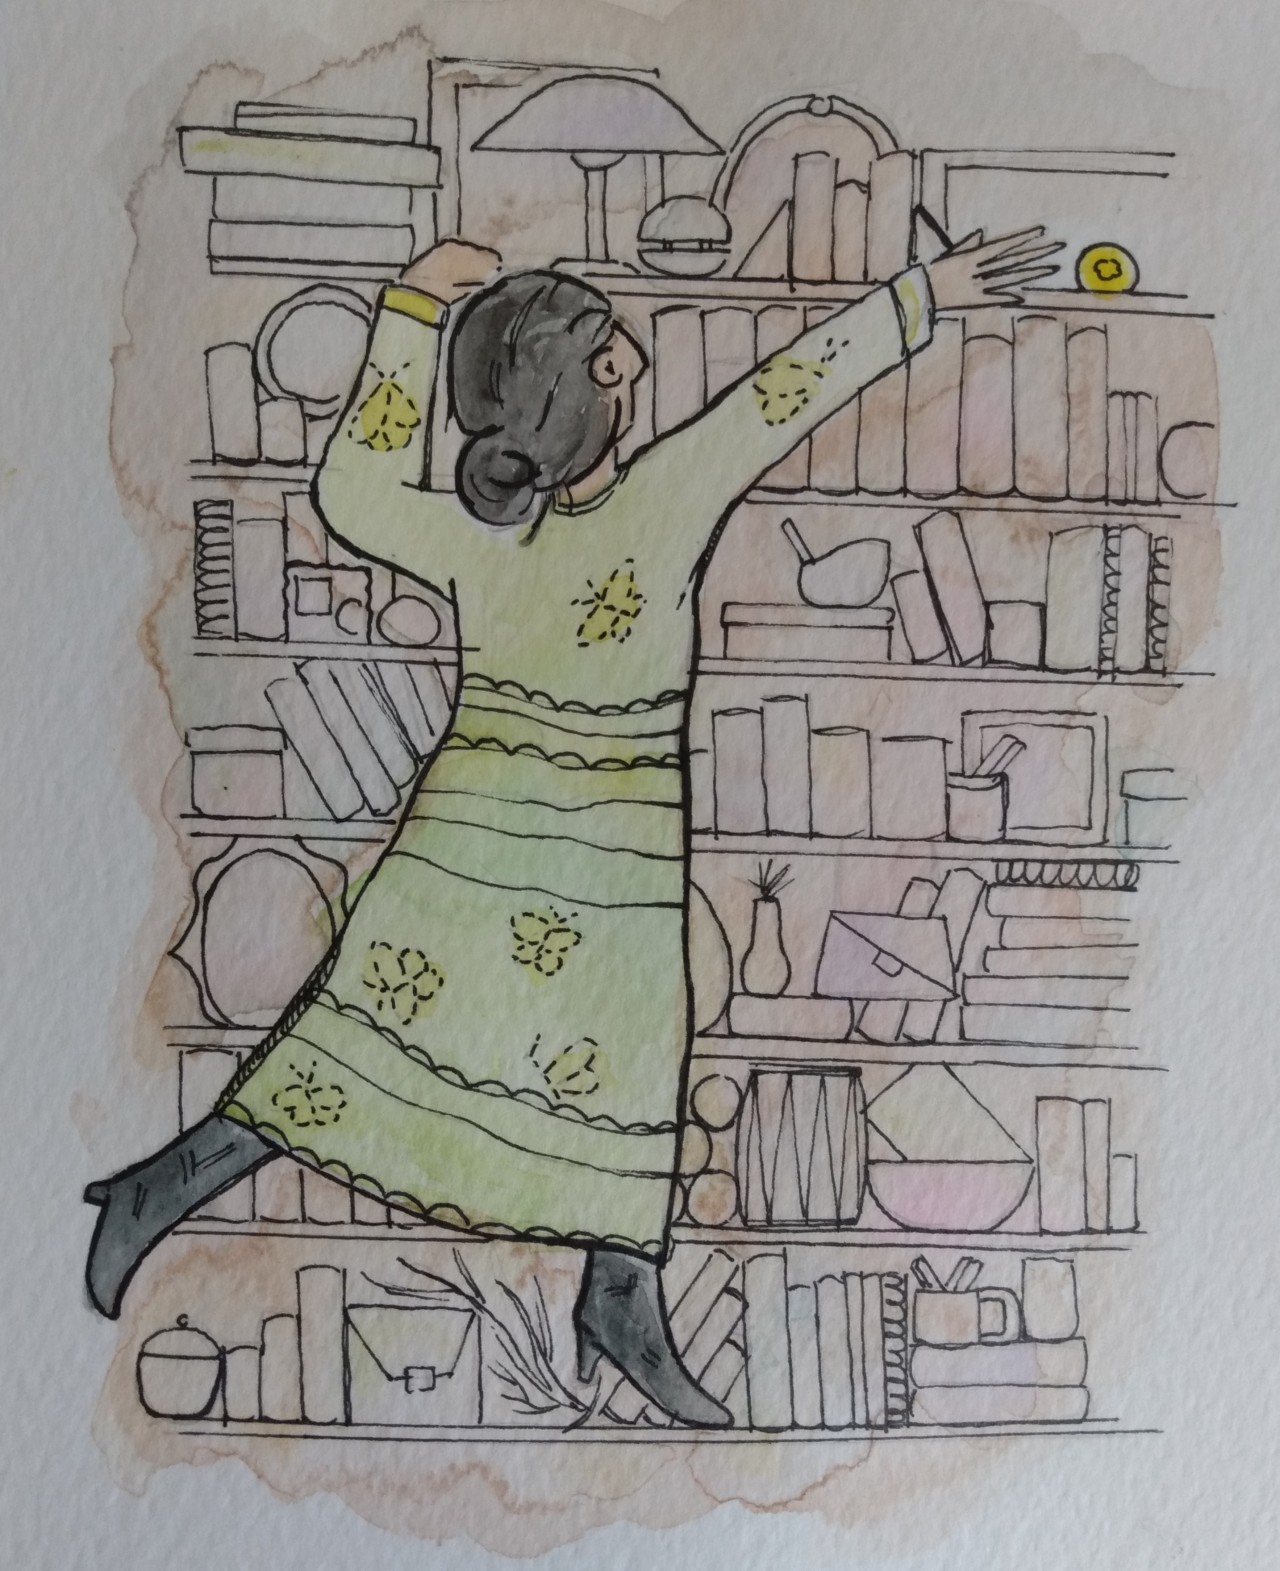 A woman in a green dresse decorated with butterflies precariously climbs a cluttered bookcase, reaching for something golden on top.